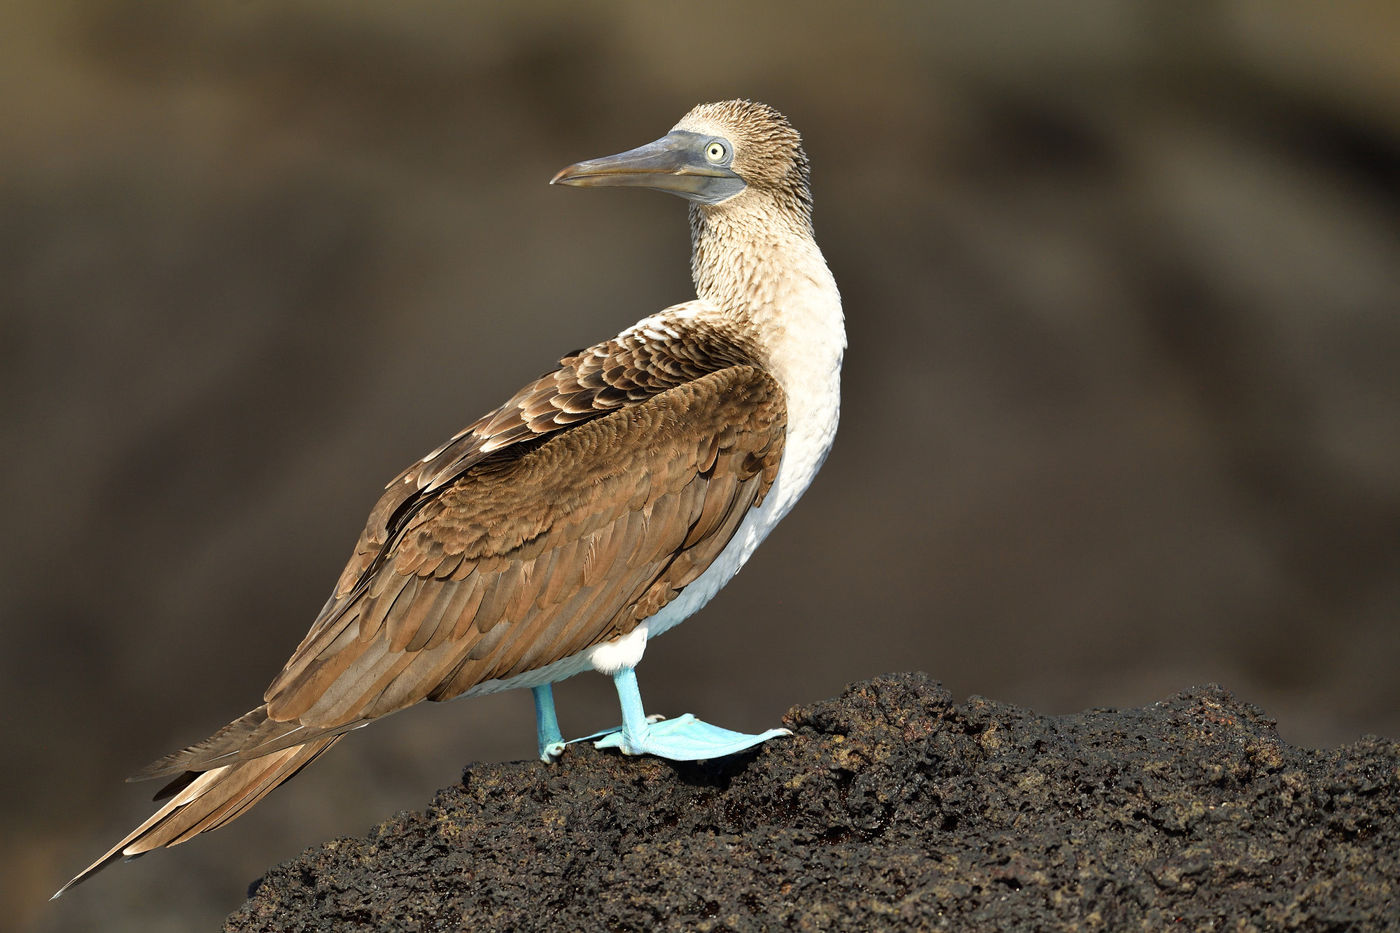 The light feet of the blue-footed booby cause a strong contrast against a dark background. © Yves Adams